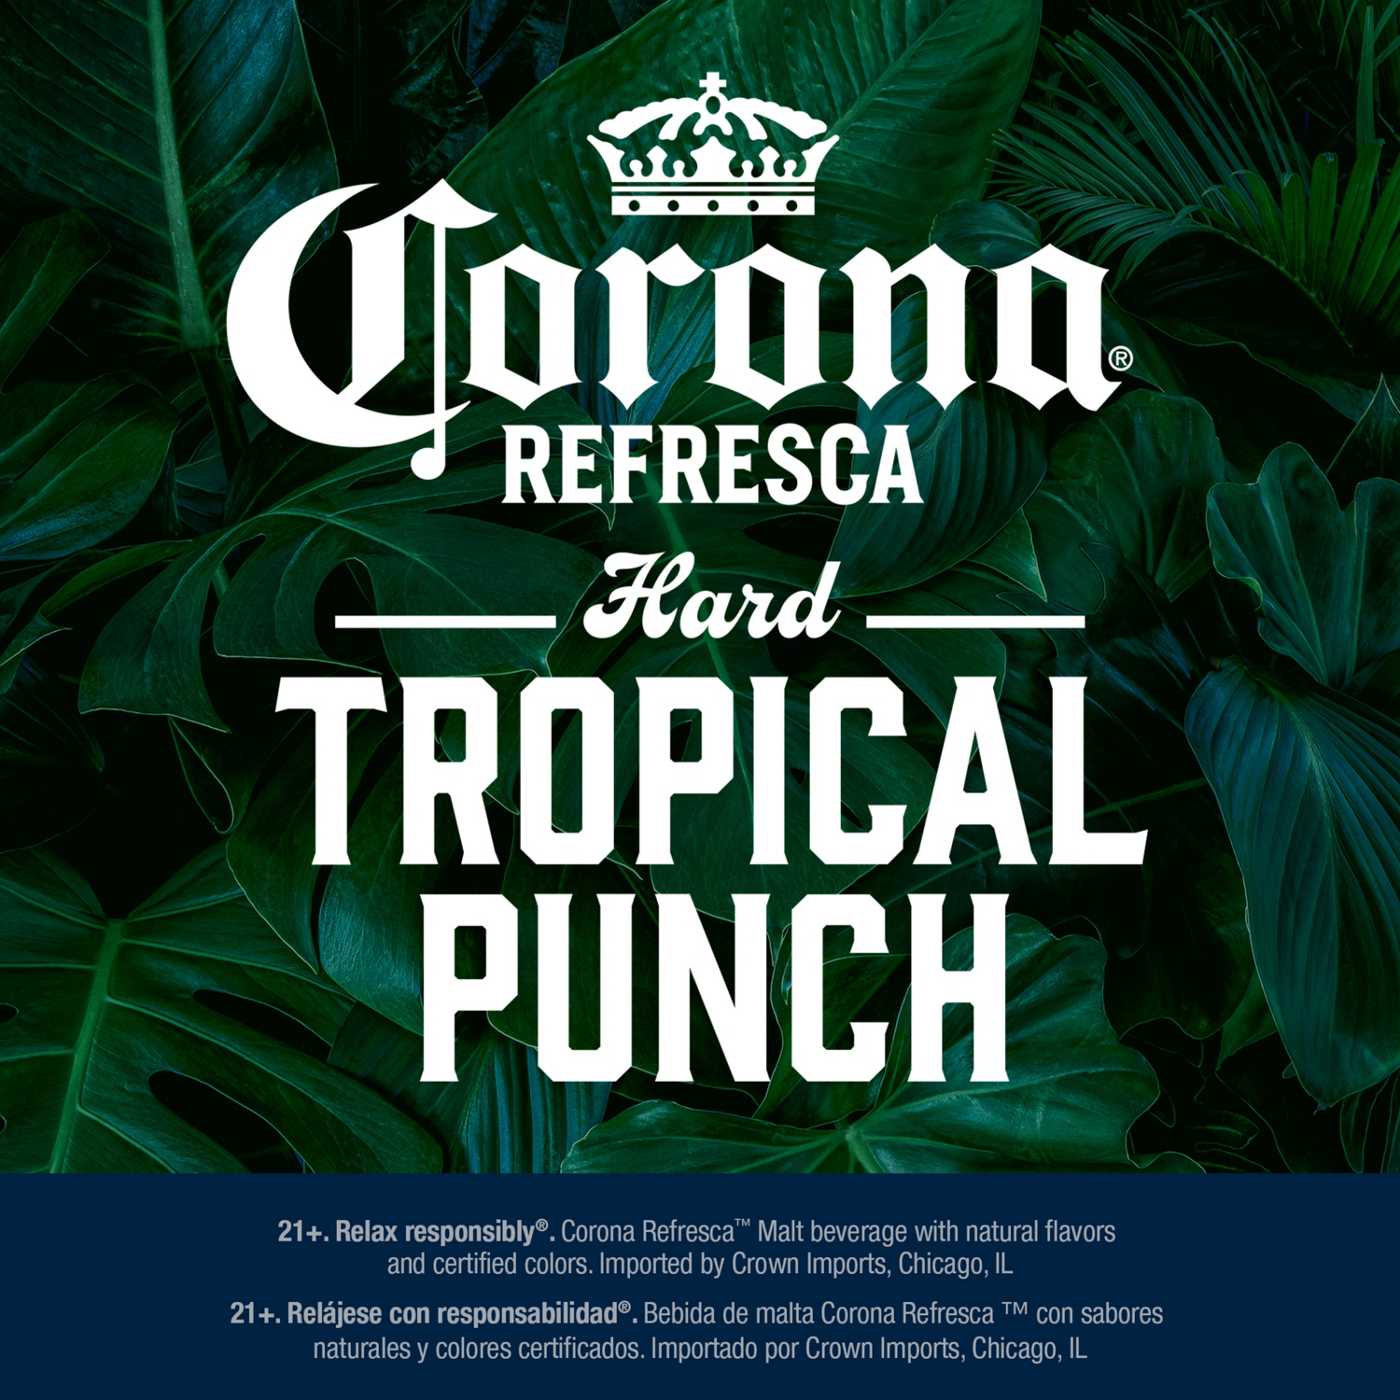 Corona Refresca Hard Tropical Punch Variety Pack 12 oz Cans, 12 pk; image 6 of 10